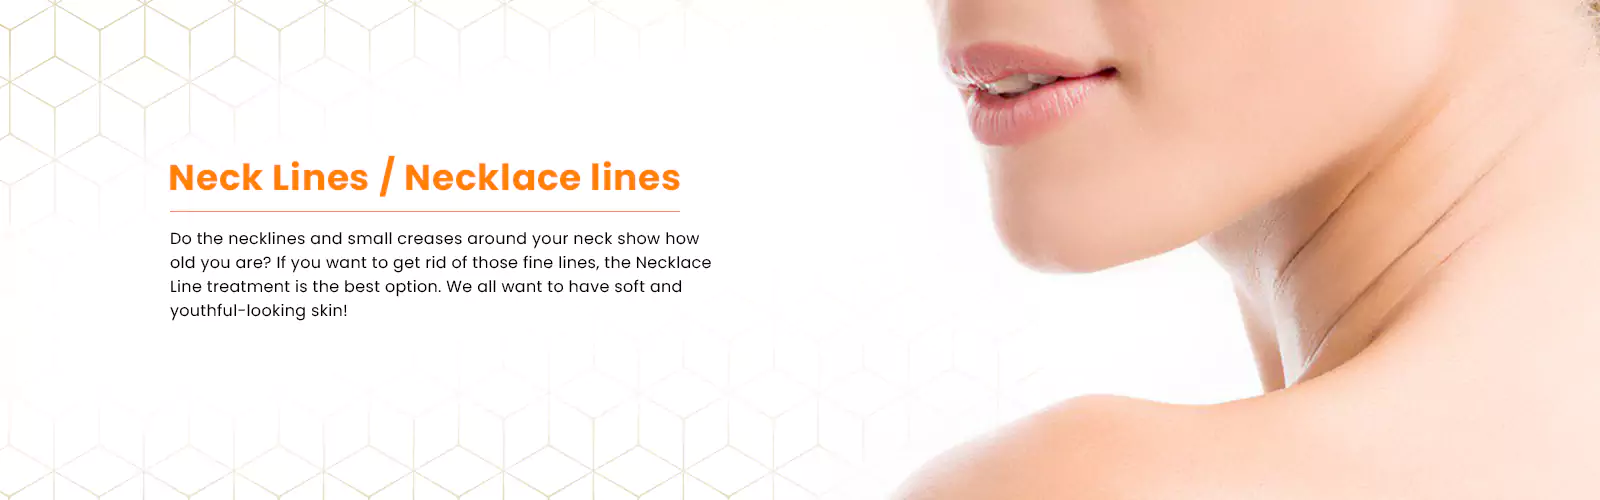 neck lines / necklace lines